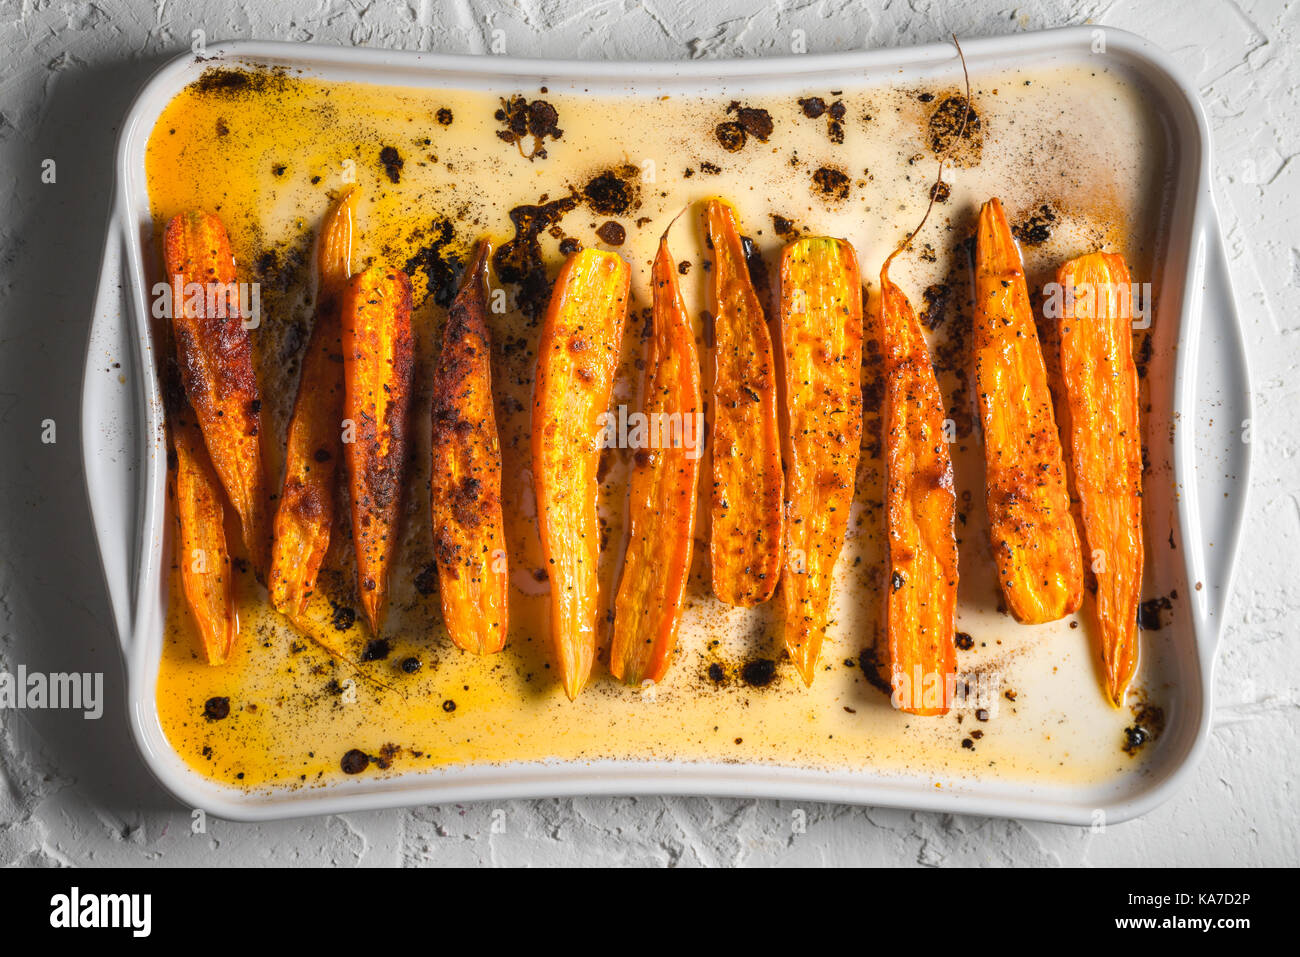 Stewed carrots in spices on a ceramic baking sheet top view horizontal Stock Photo